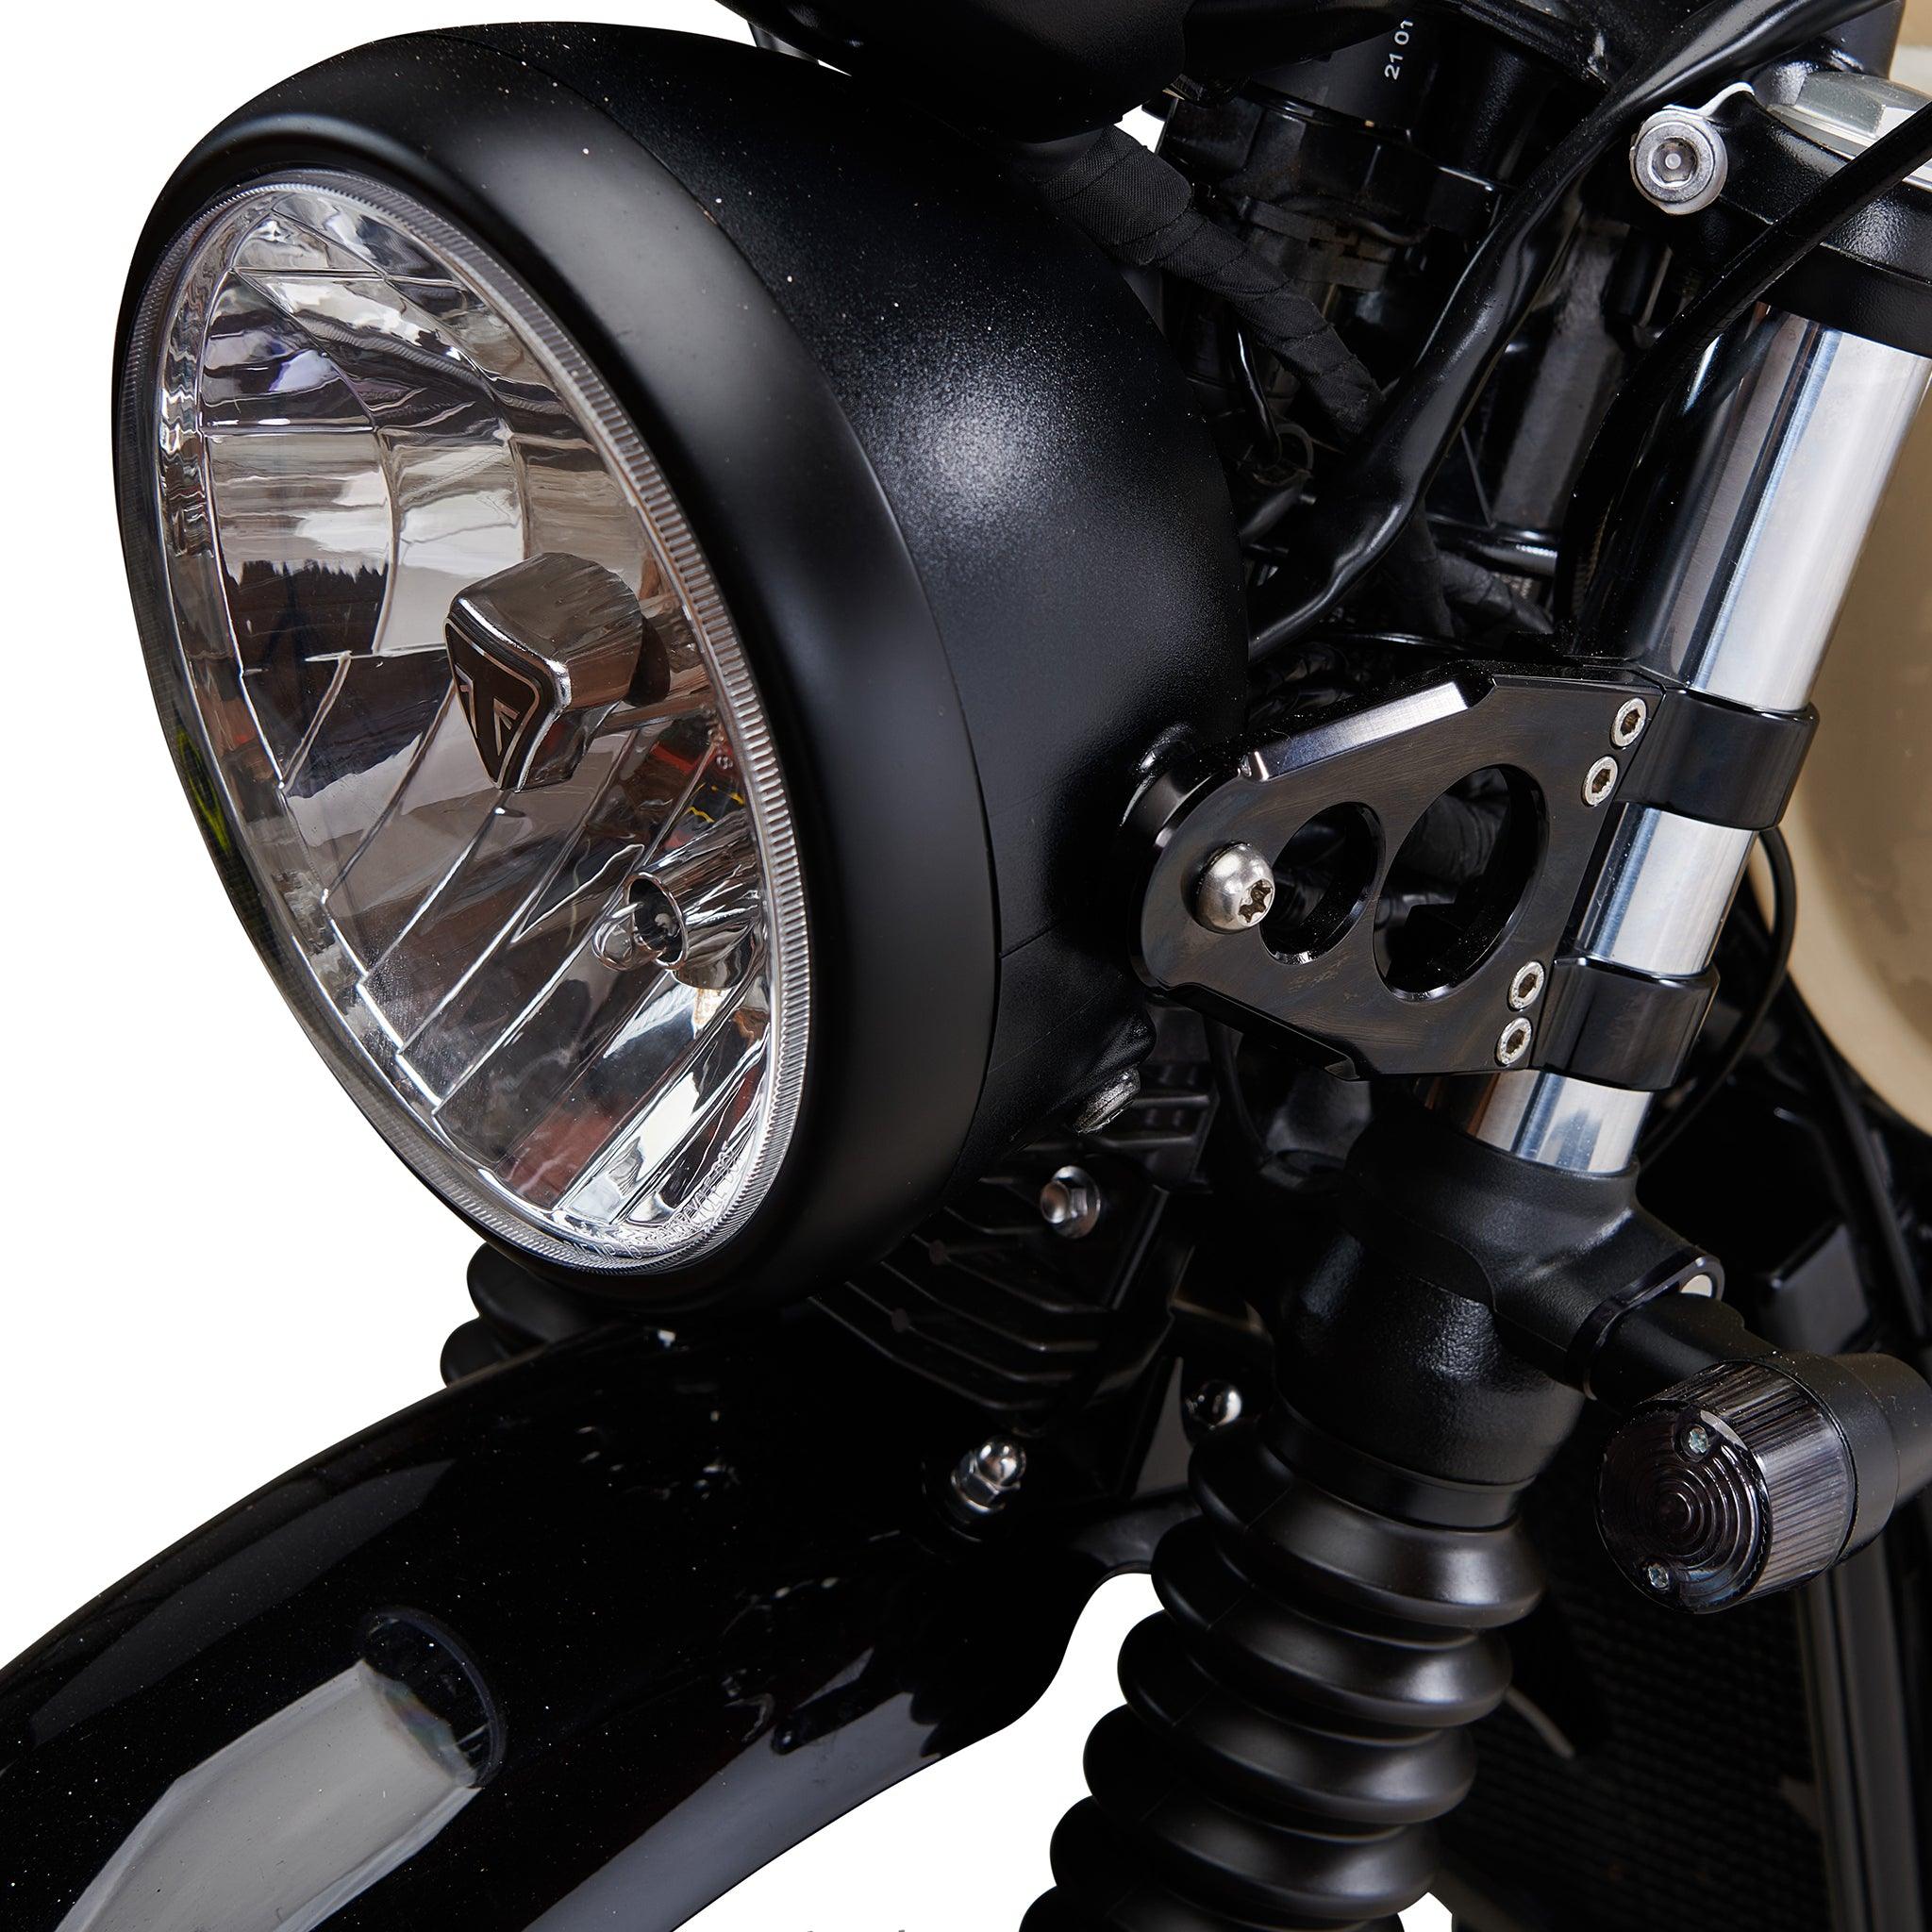 Top-notch Retro Headlight Ears for Triumph Motorcycles